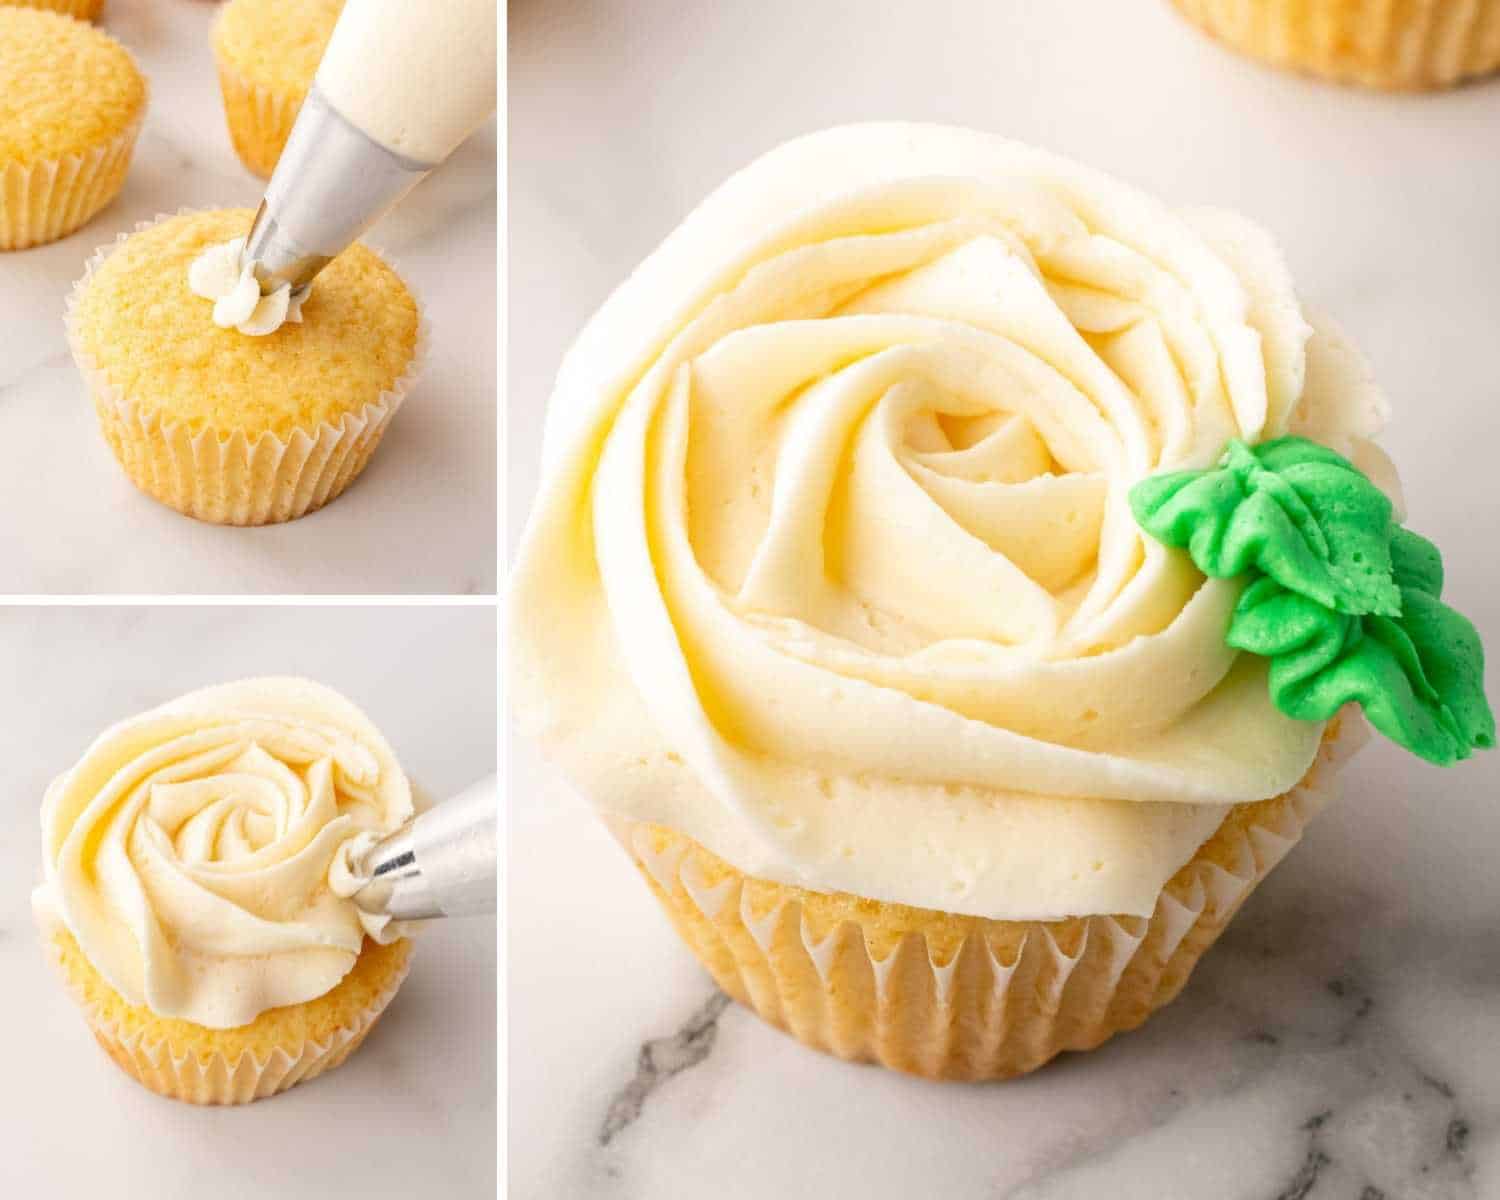 How to pipe a buttercream rose with closed star tip